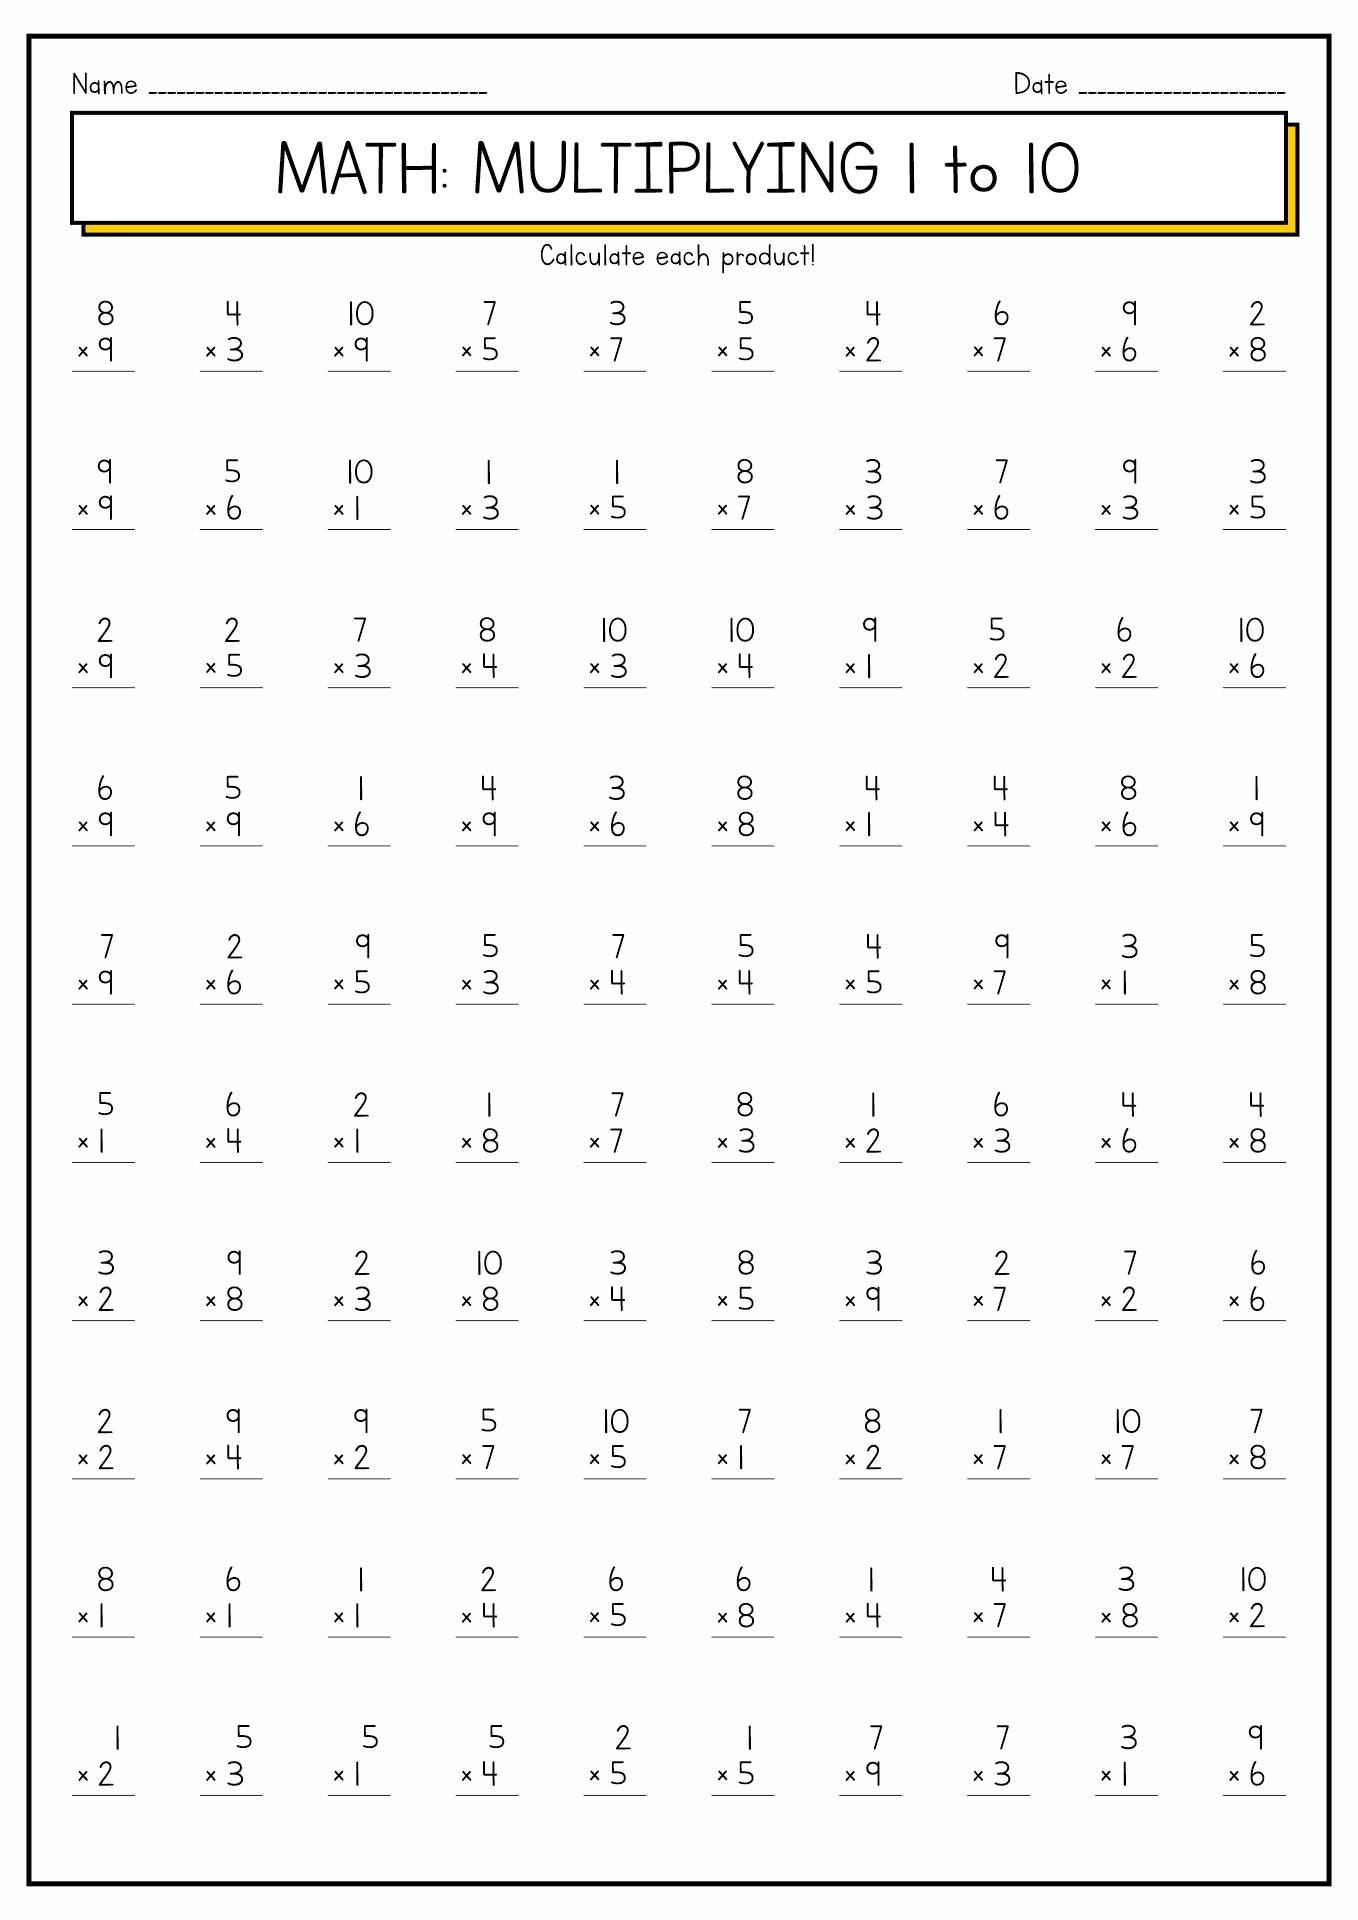 Multiplying 1 To 12 By 12 100 Questions A Multiplying 1 To 12 By 0 And 1 100 Questions A 